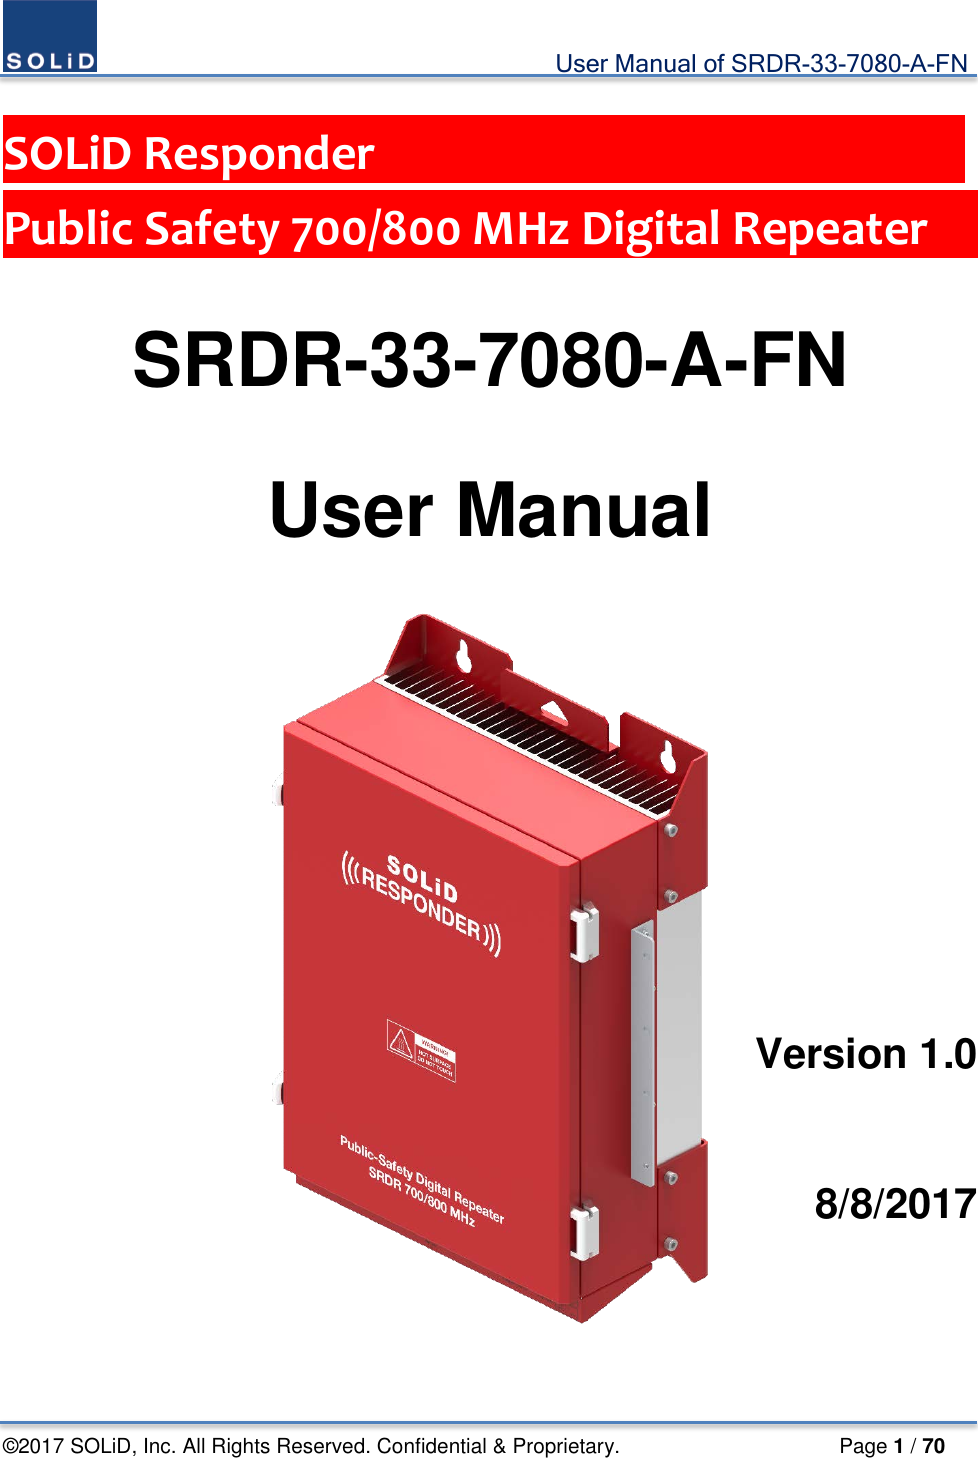                                             User Manual of SRDR-33-7080-A-FN ©2017 SOLiD, Inc. All Rights Reserved. Confidential &amp; Proprietary.                     Page 1 / 70  SOLiD Responder                         Public Safety 700/800 MHz Digital Repeater      SRDR-33-7080-A-FN  User Manual        Version 1.0    8/8/2017    